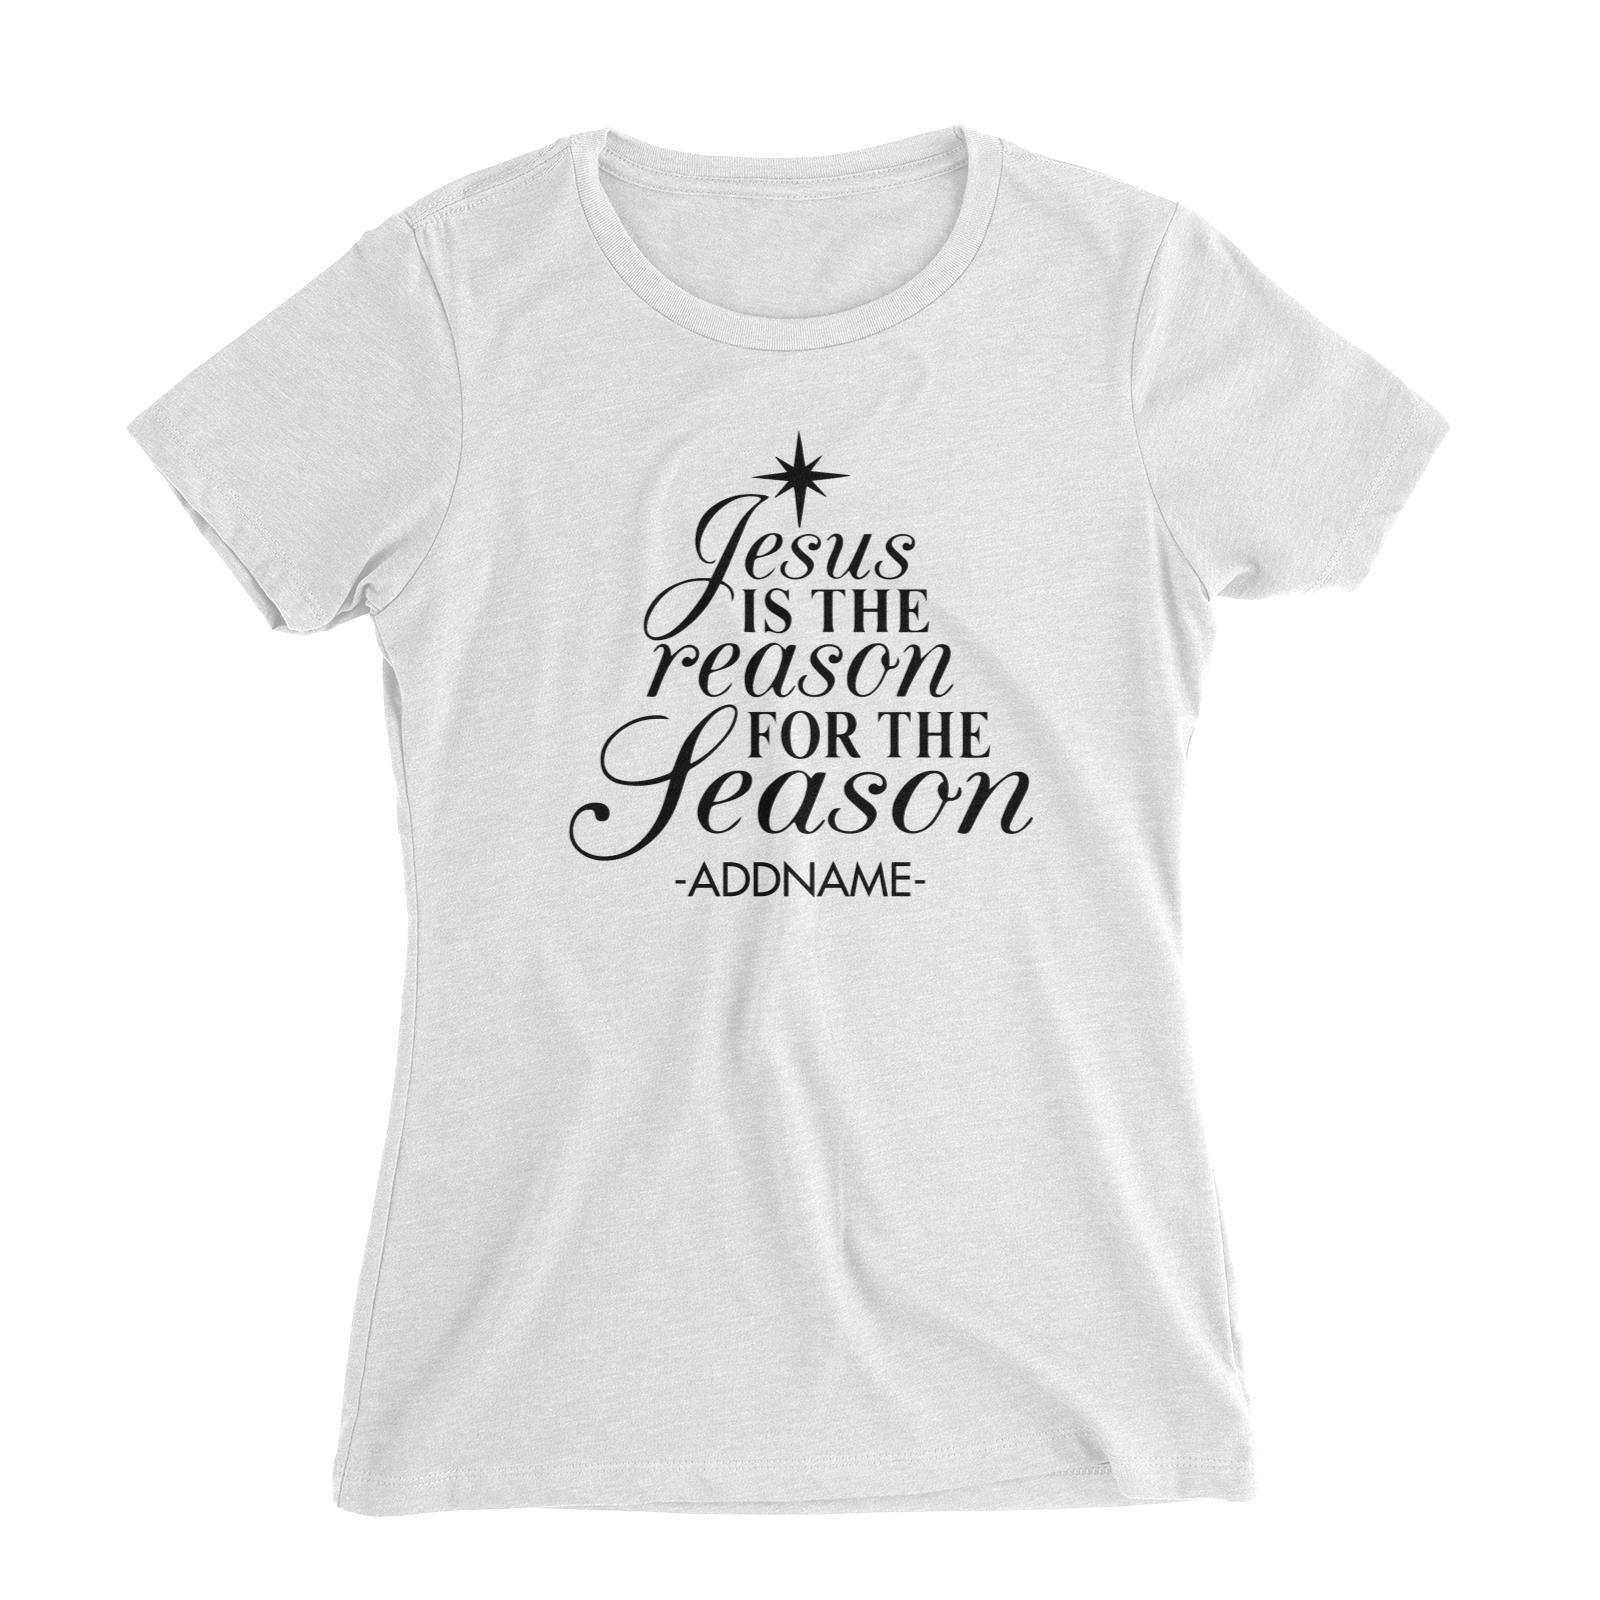 Jesus Is The Reason For The Season Addname Women's Slim Fit T-Shirt Christmas Personalizable Designs Lettering